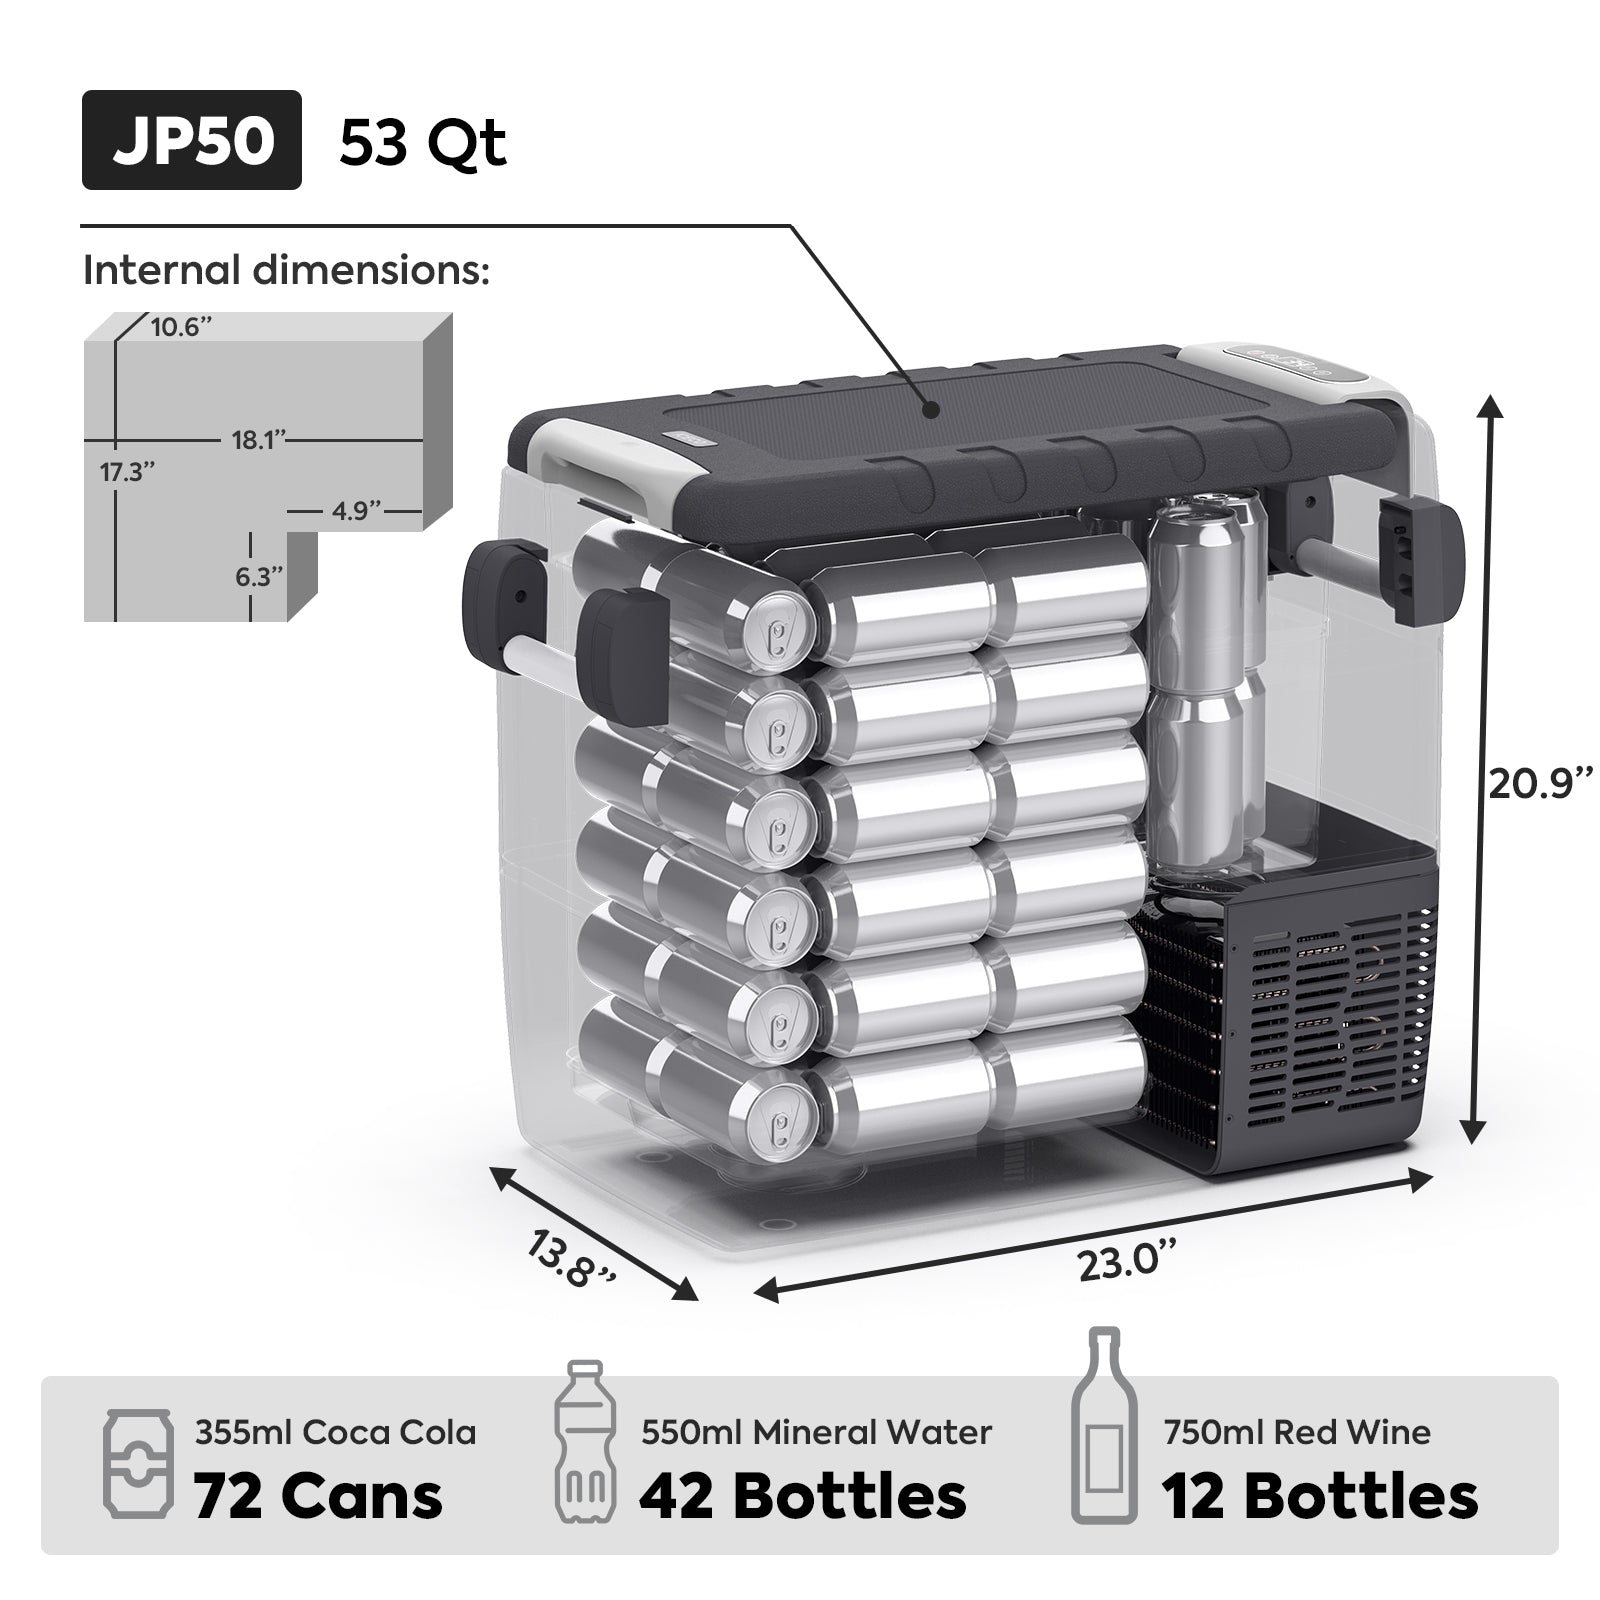 52.8QT JP50 12V APP Controlled Portable Fridge With Free Protective Cover-Portable Fridge-www.icecofreezer.com